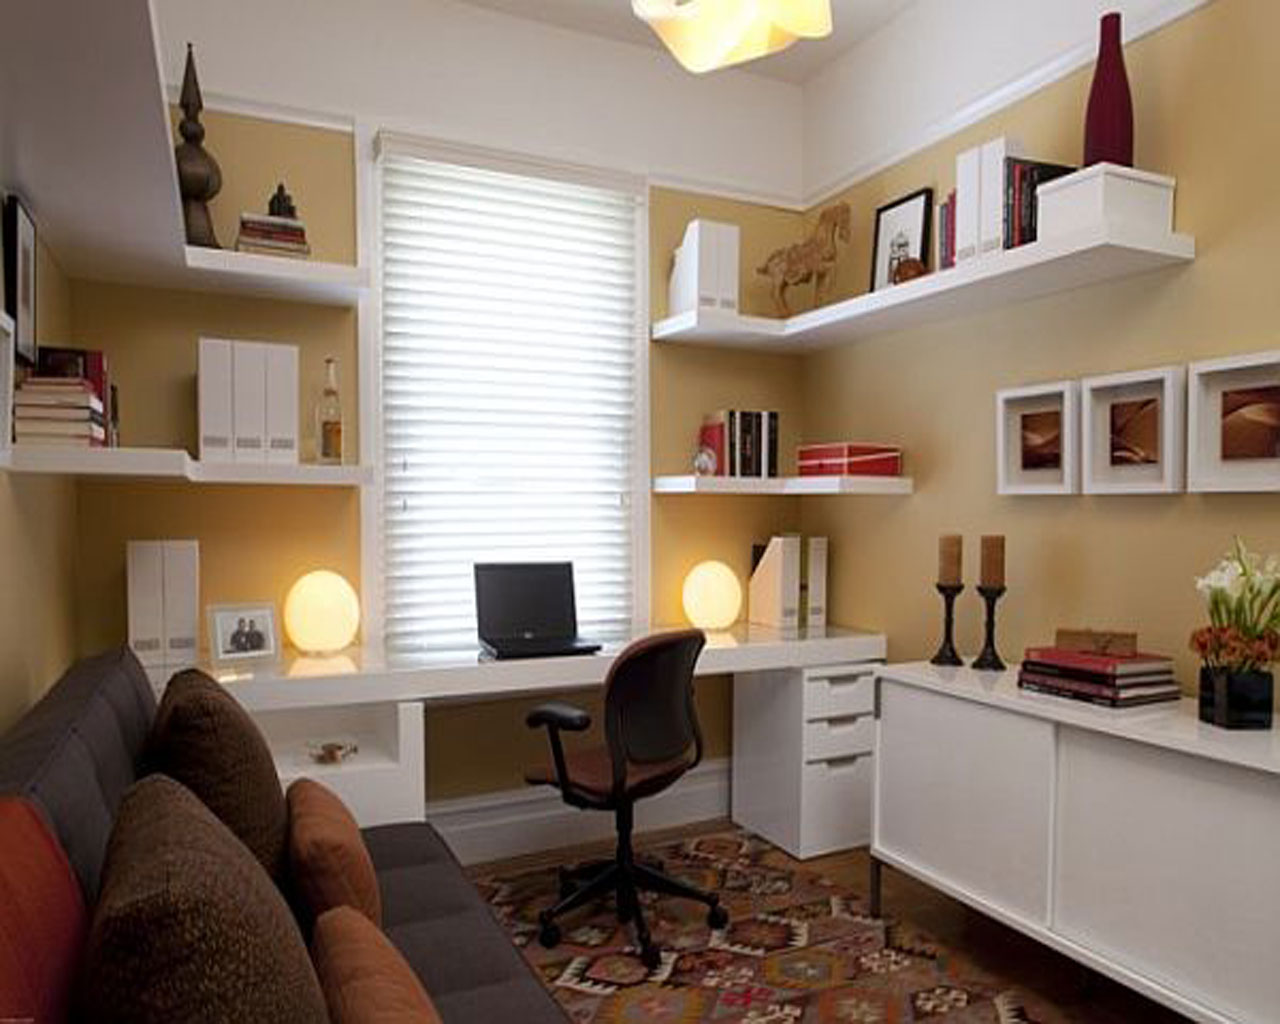 Home Office Apartment Ideas - Small Home Office With Couch - HD Wallpaper 